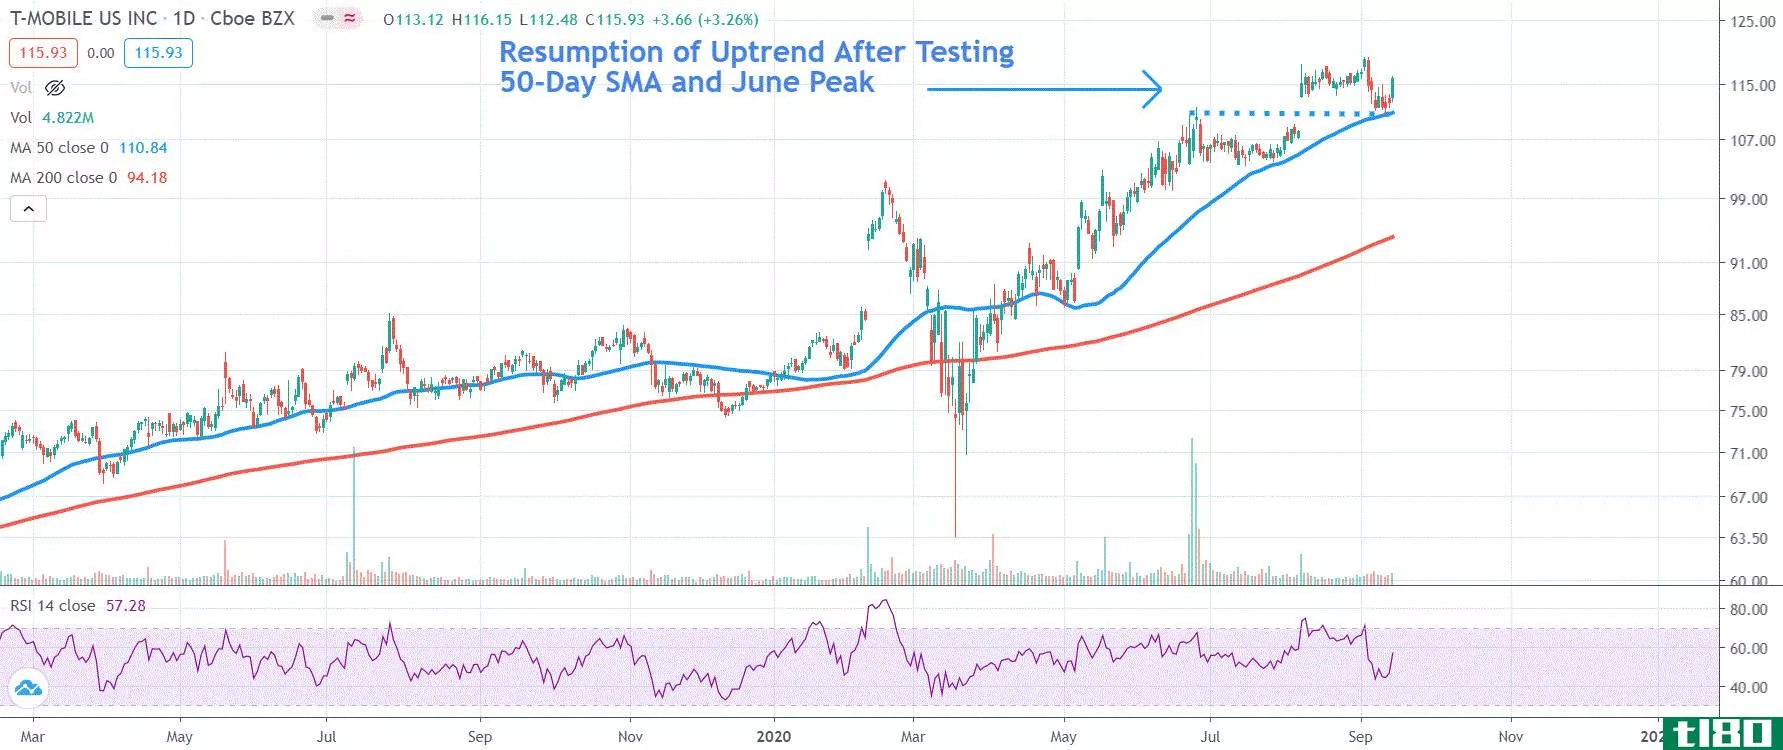 Chart depicting the share price of T-Mobile US, Inc. (TMUS)